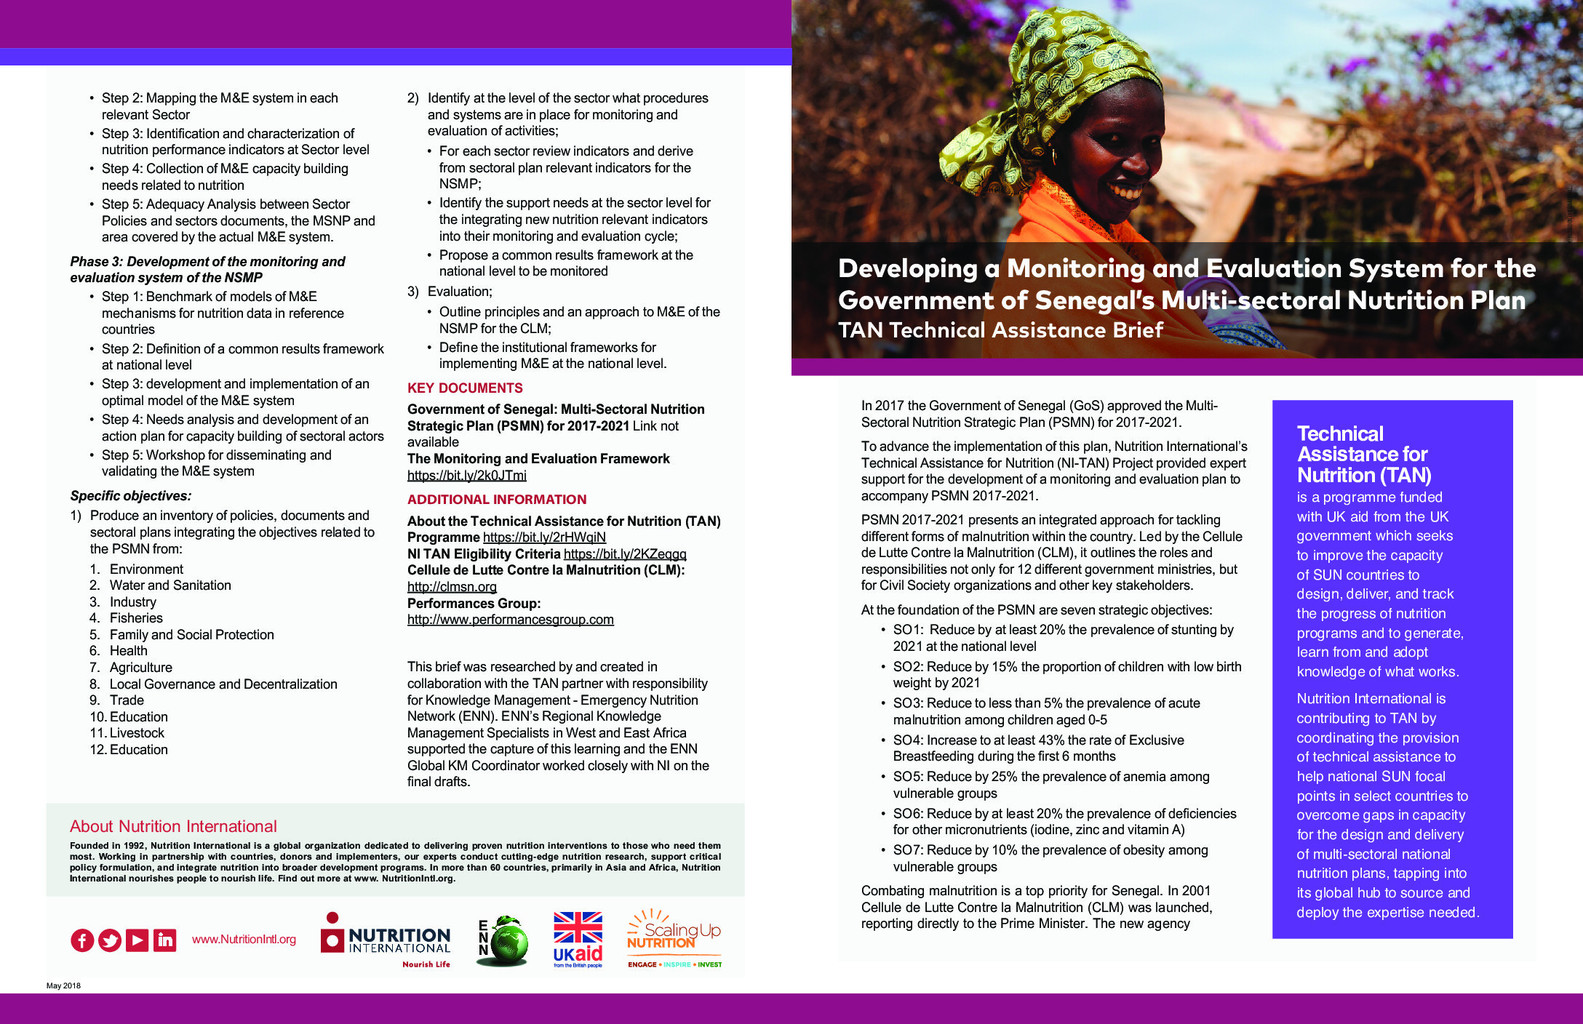 Developing a Monitoring and Evaluation System for the Government of Senegal’s Multi-sectoral Nutrition Plan – TAN Technical Assistance Brief thumbnail